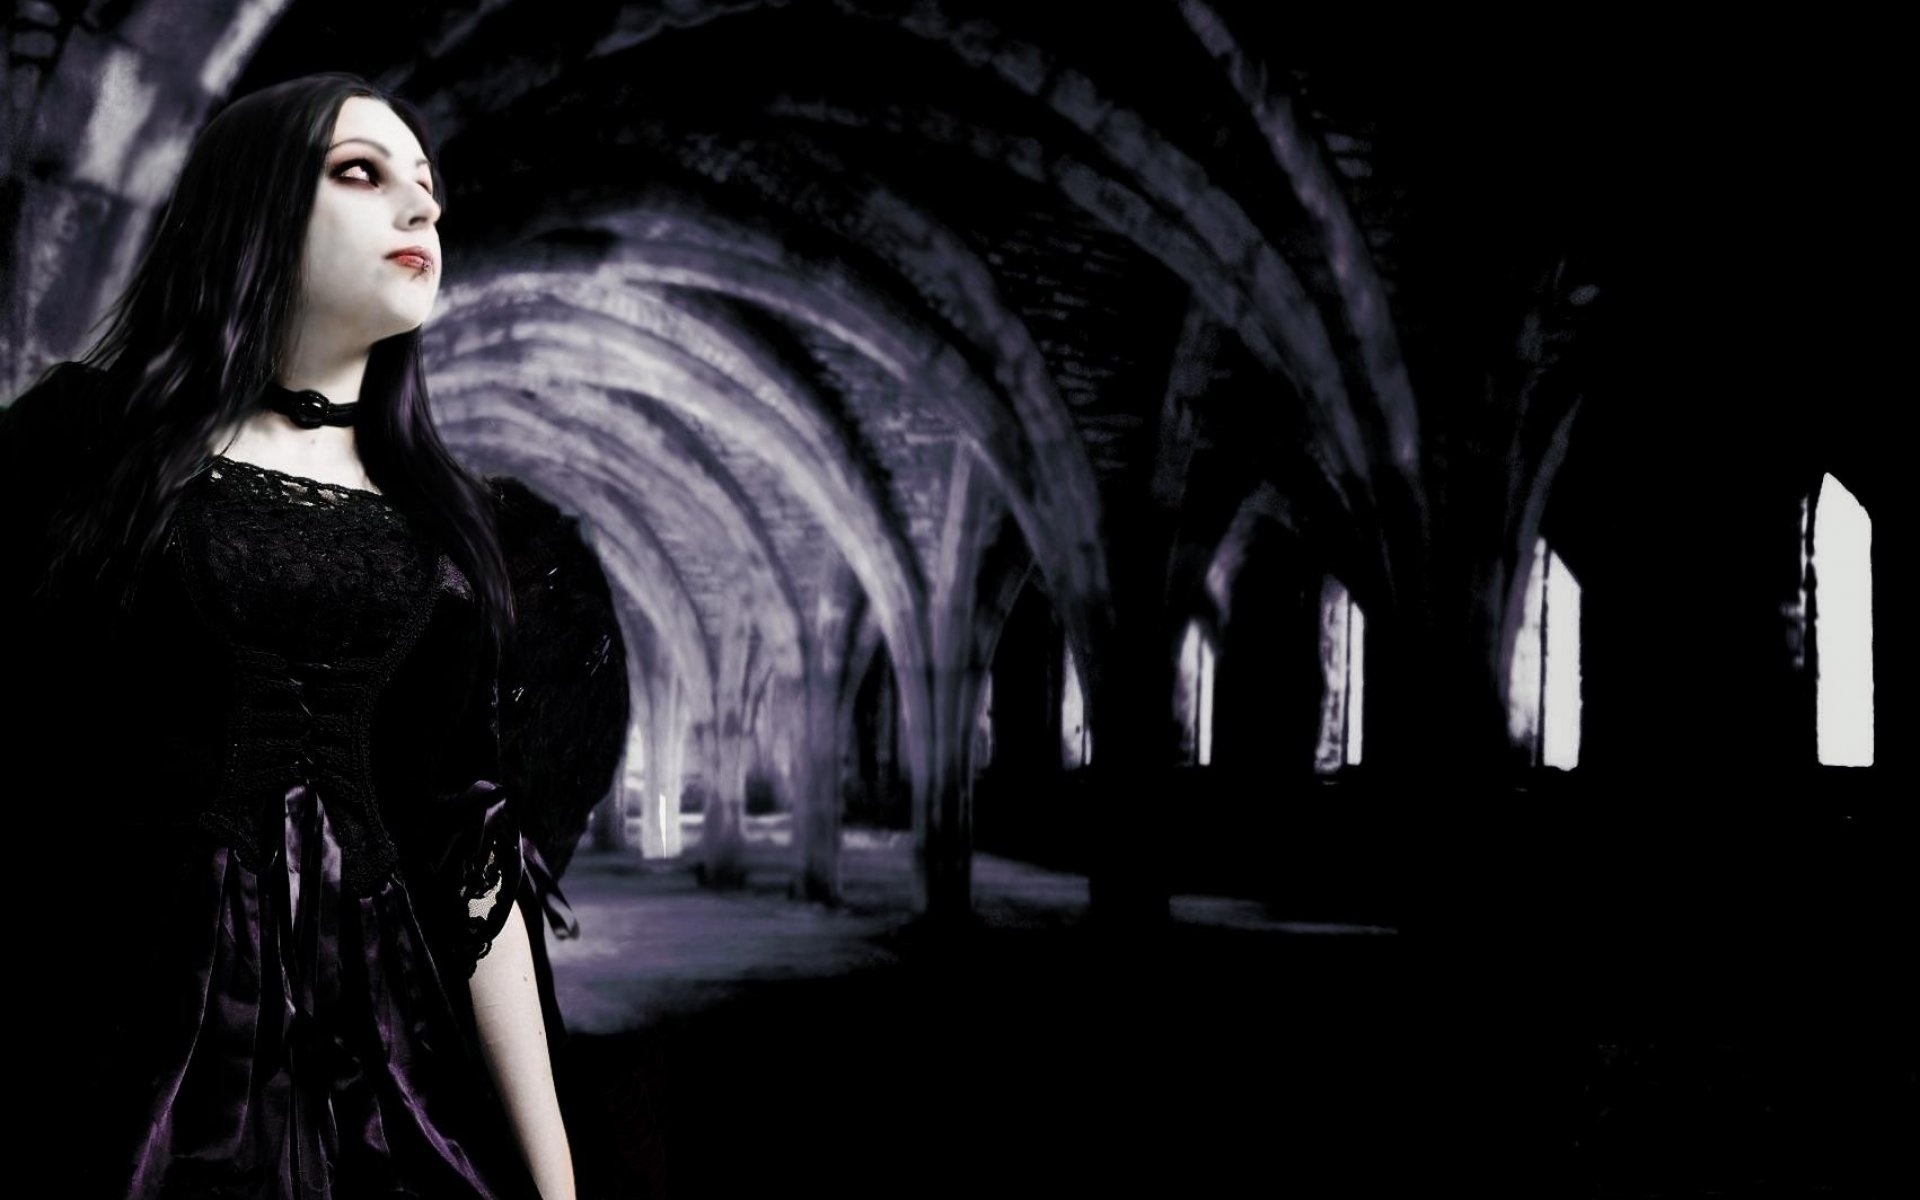 Gothic Art: Dark alley, The rib vault, Gothic makeup, Girl with wings, Old path artwork. 1920x1200 HD Wallpaper.